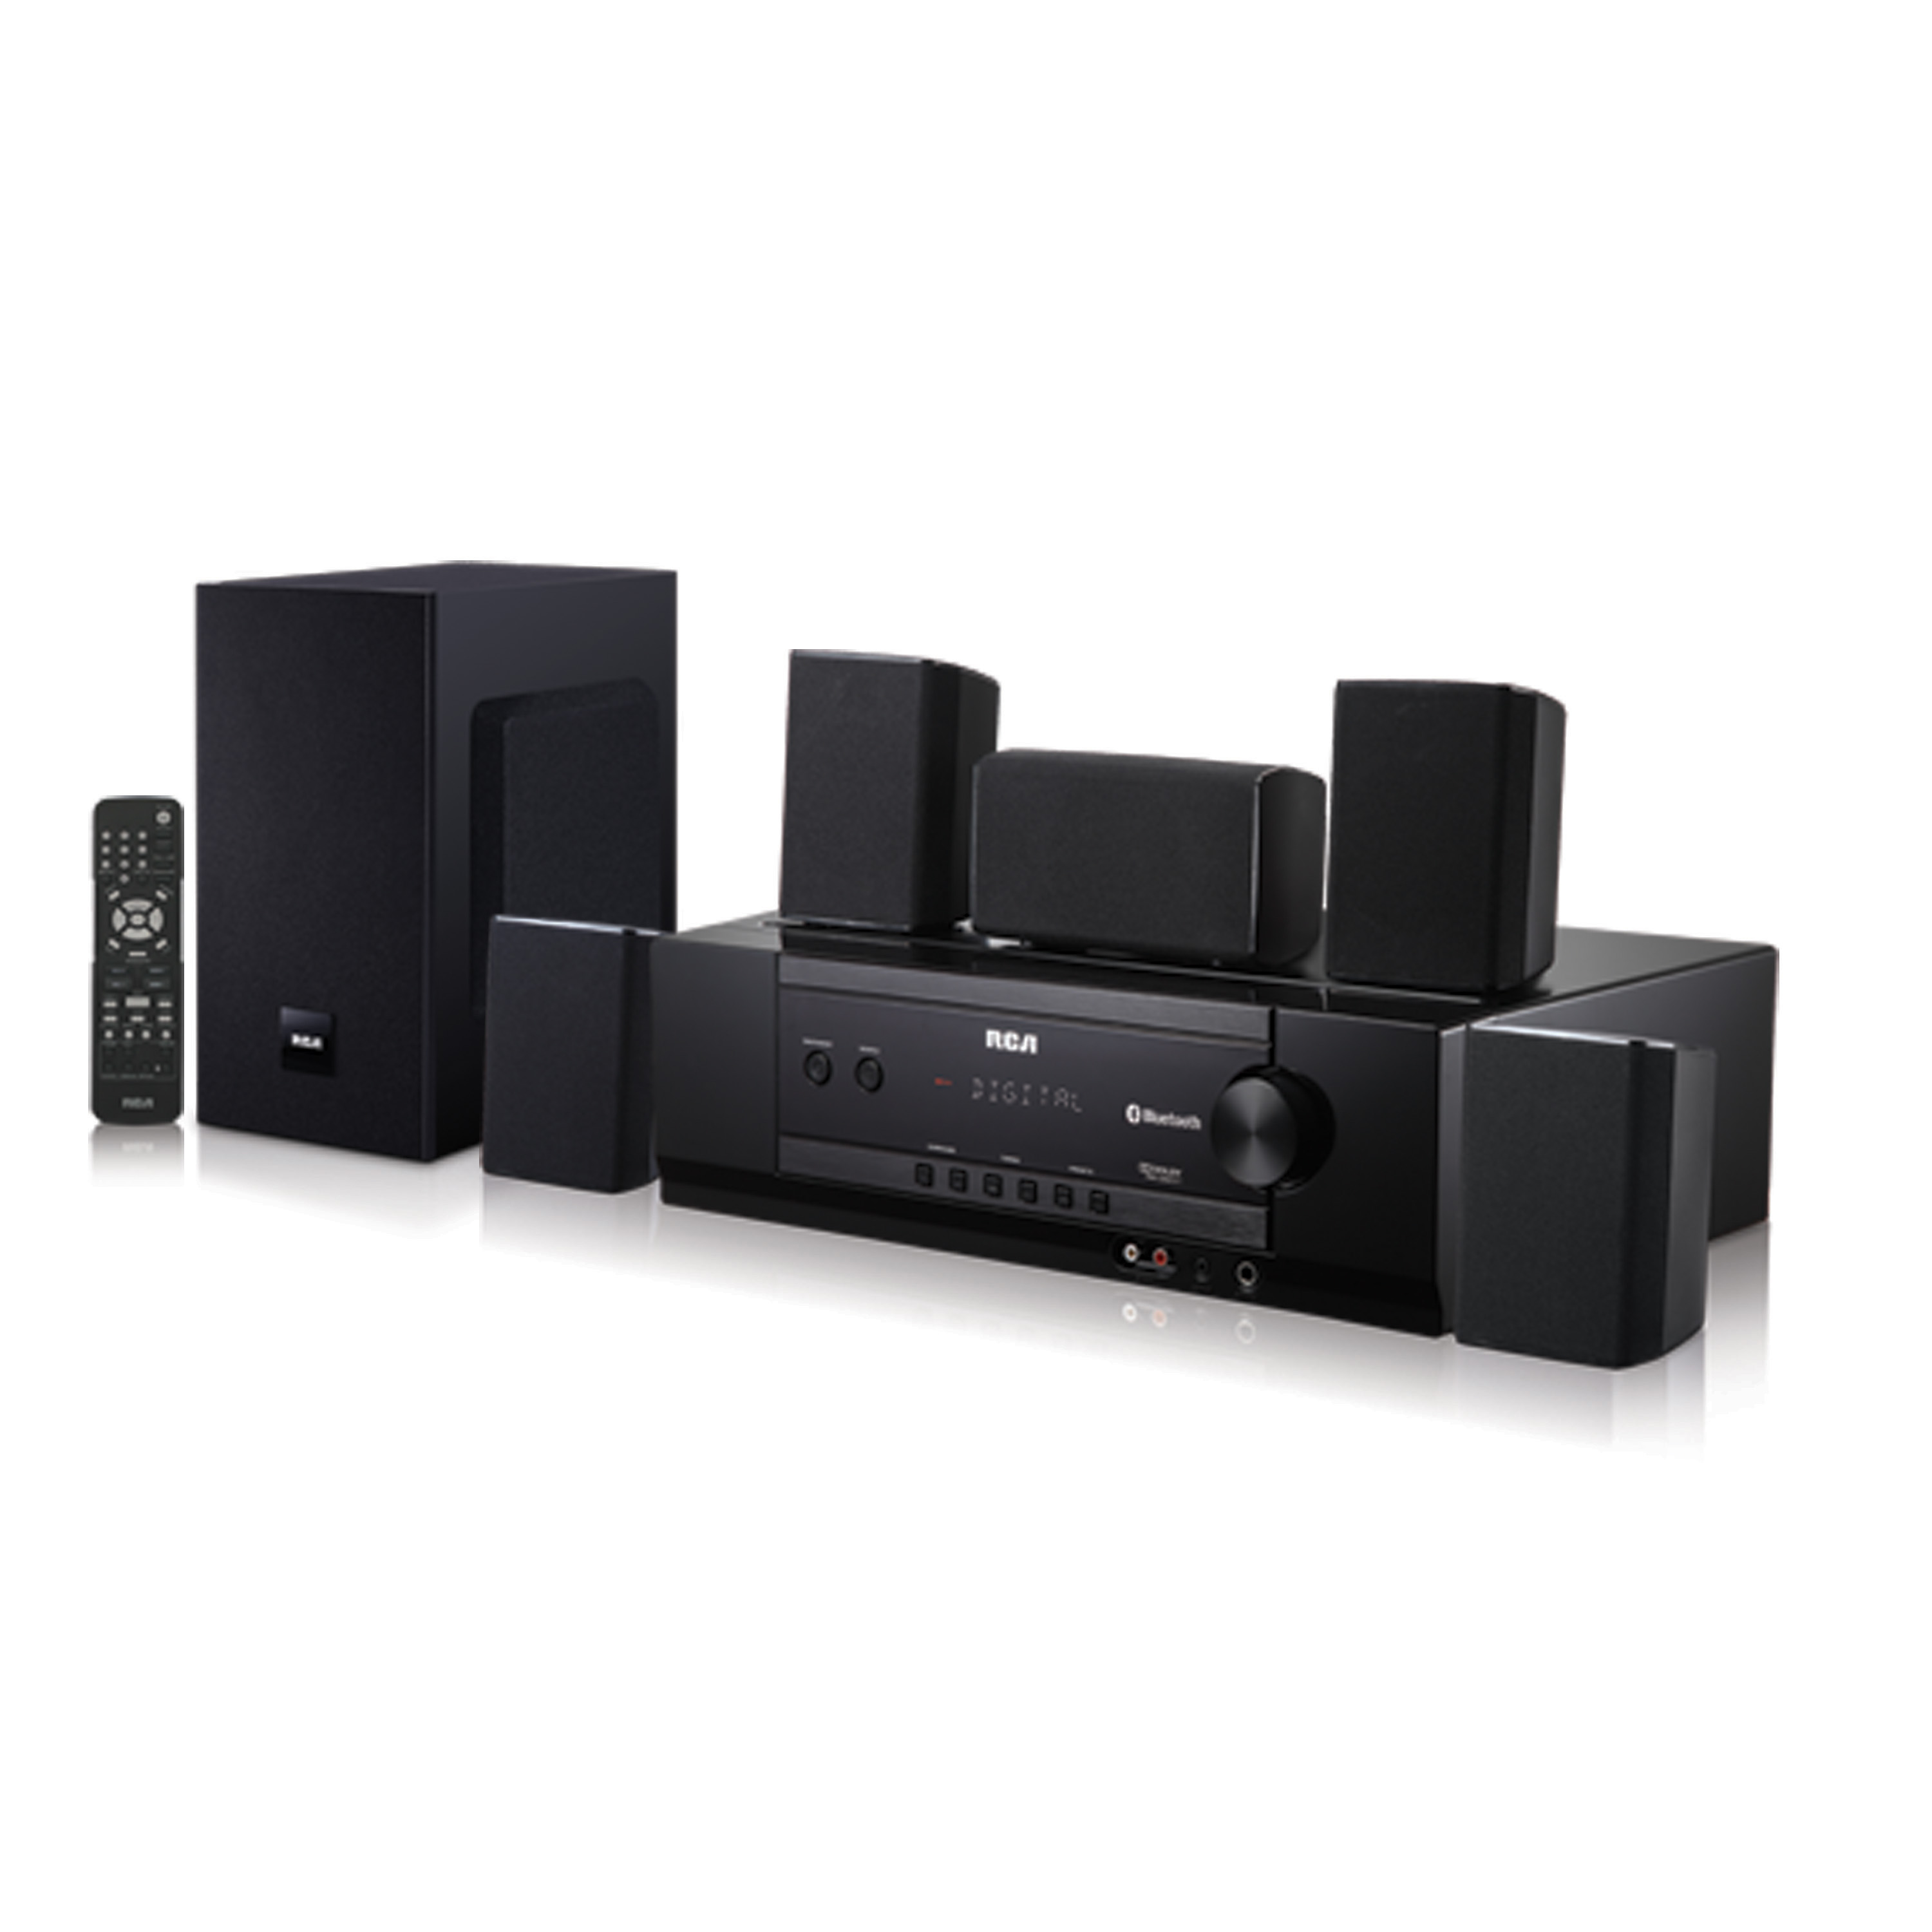 RCA RT2781BE 1000W Home Theater System with Bluetooth - image 1 of 4